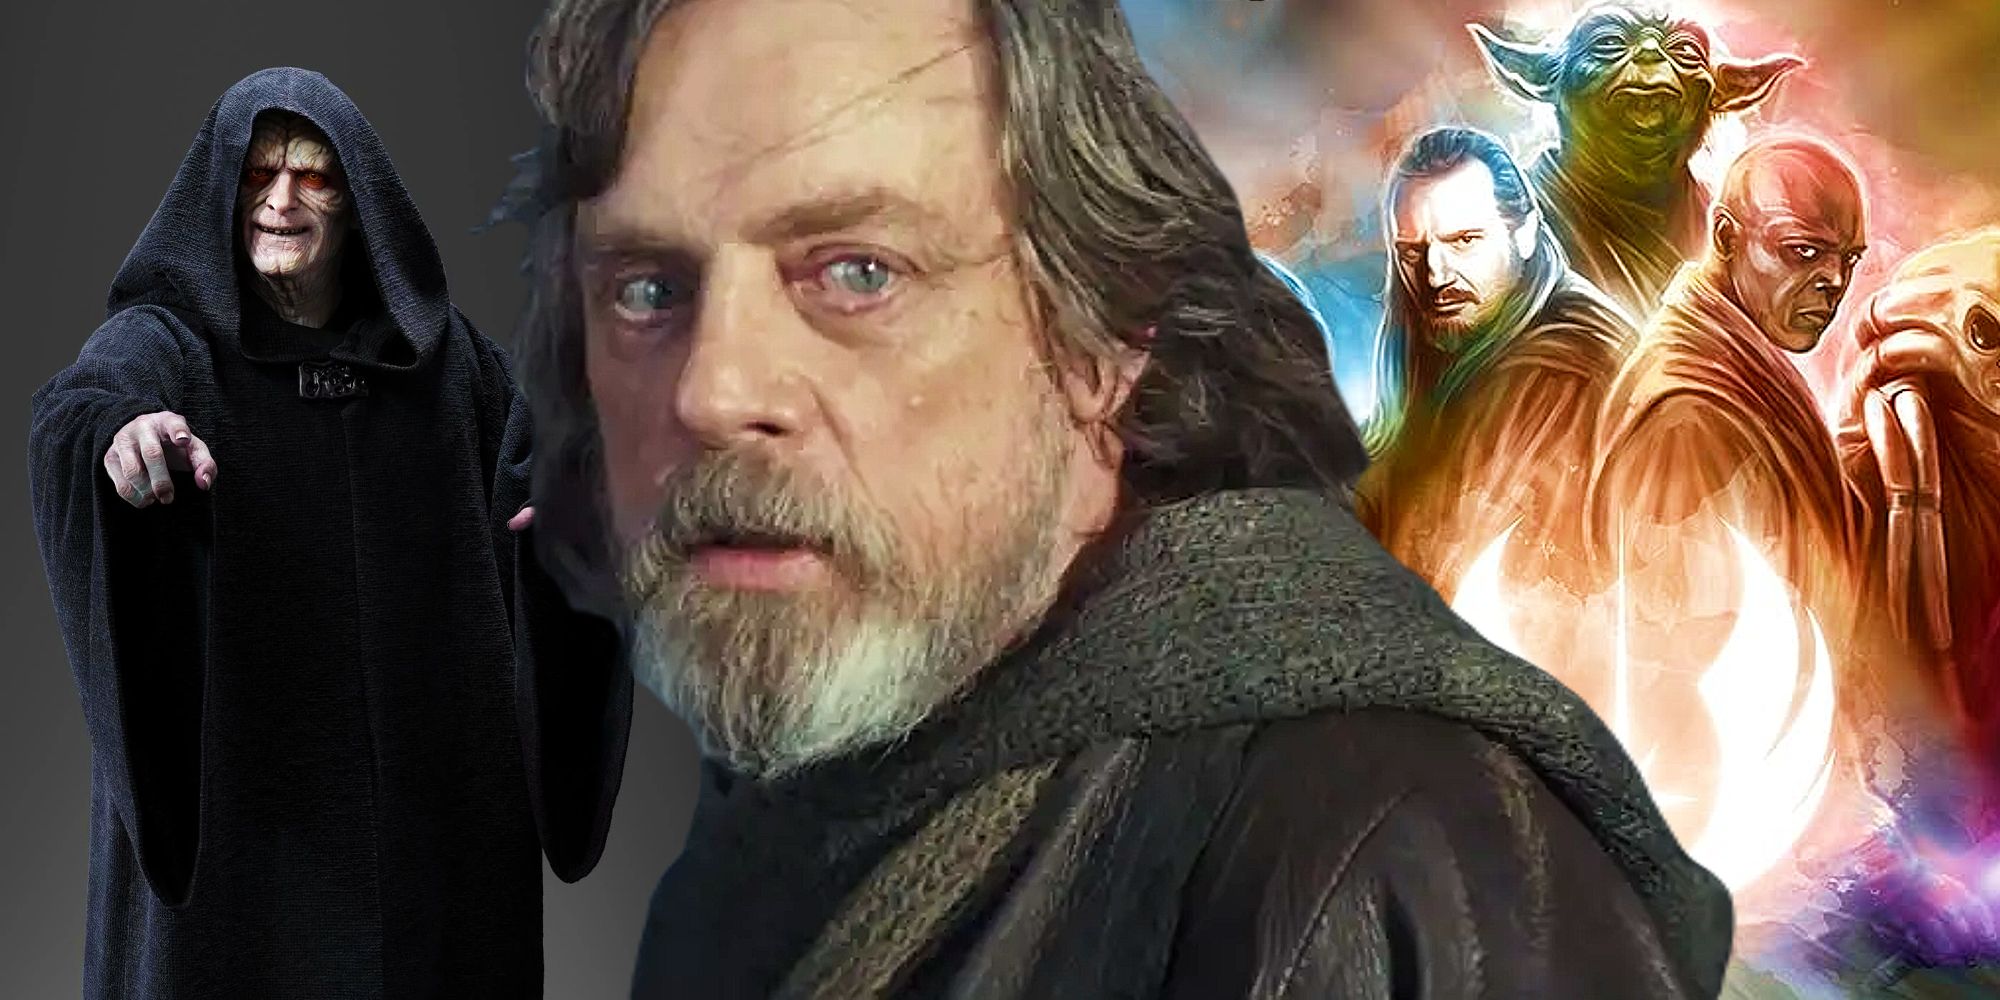 Luke Skywalker from The Last Jedi between the Jedi of the Prequel Era and Emperor Palpatine